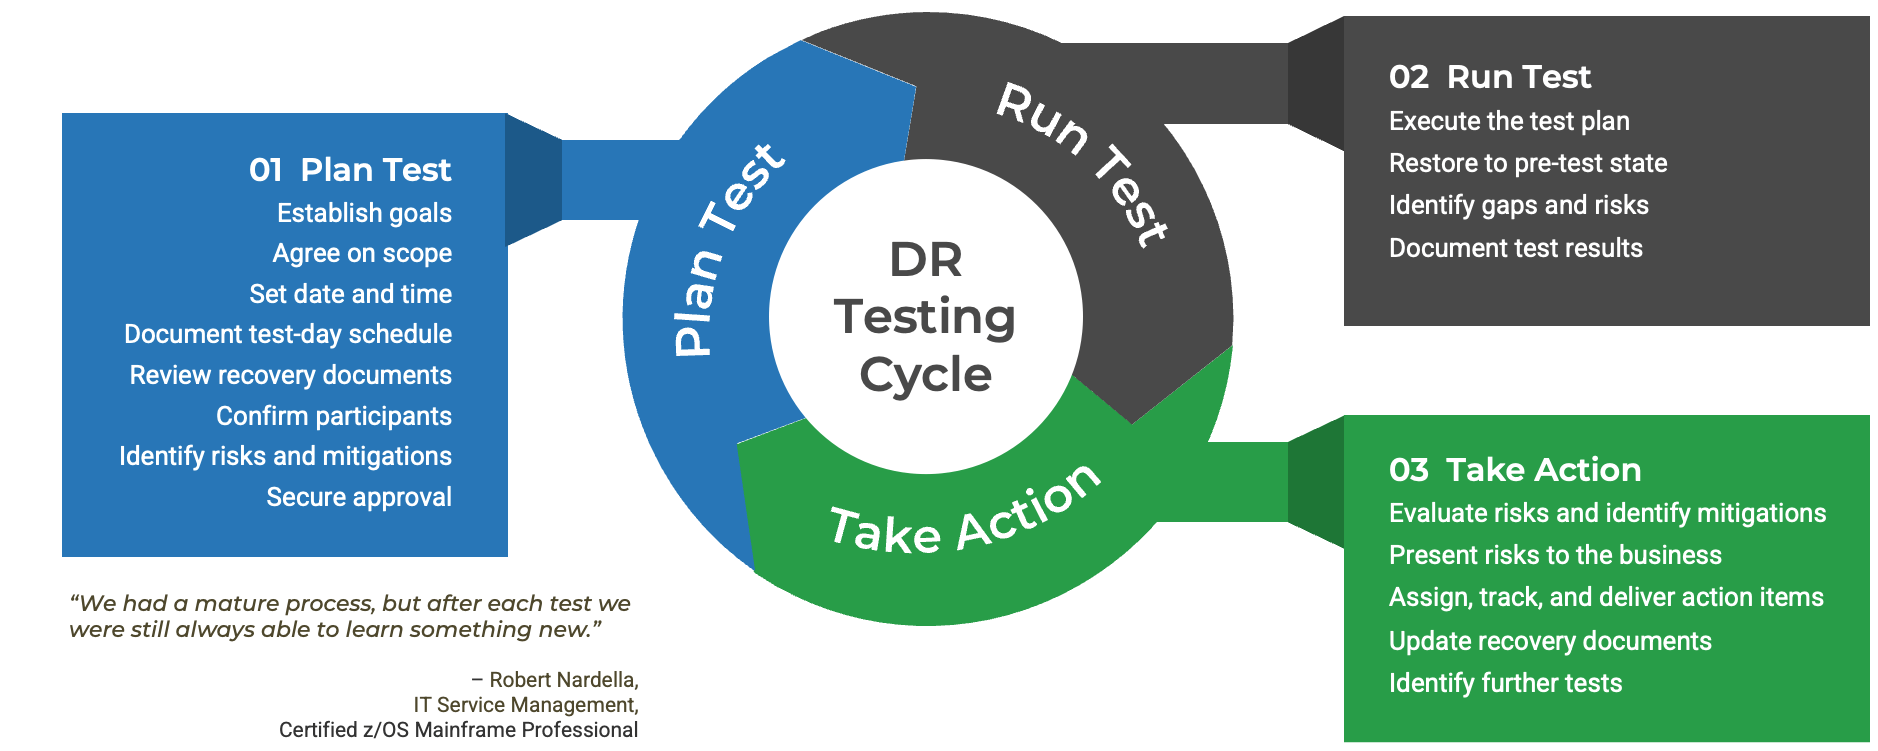 The testing cycle: 1. Plan a test, 2. Run test, 3. Take action.